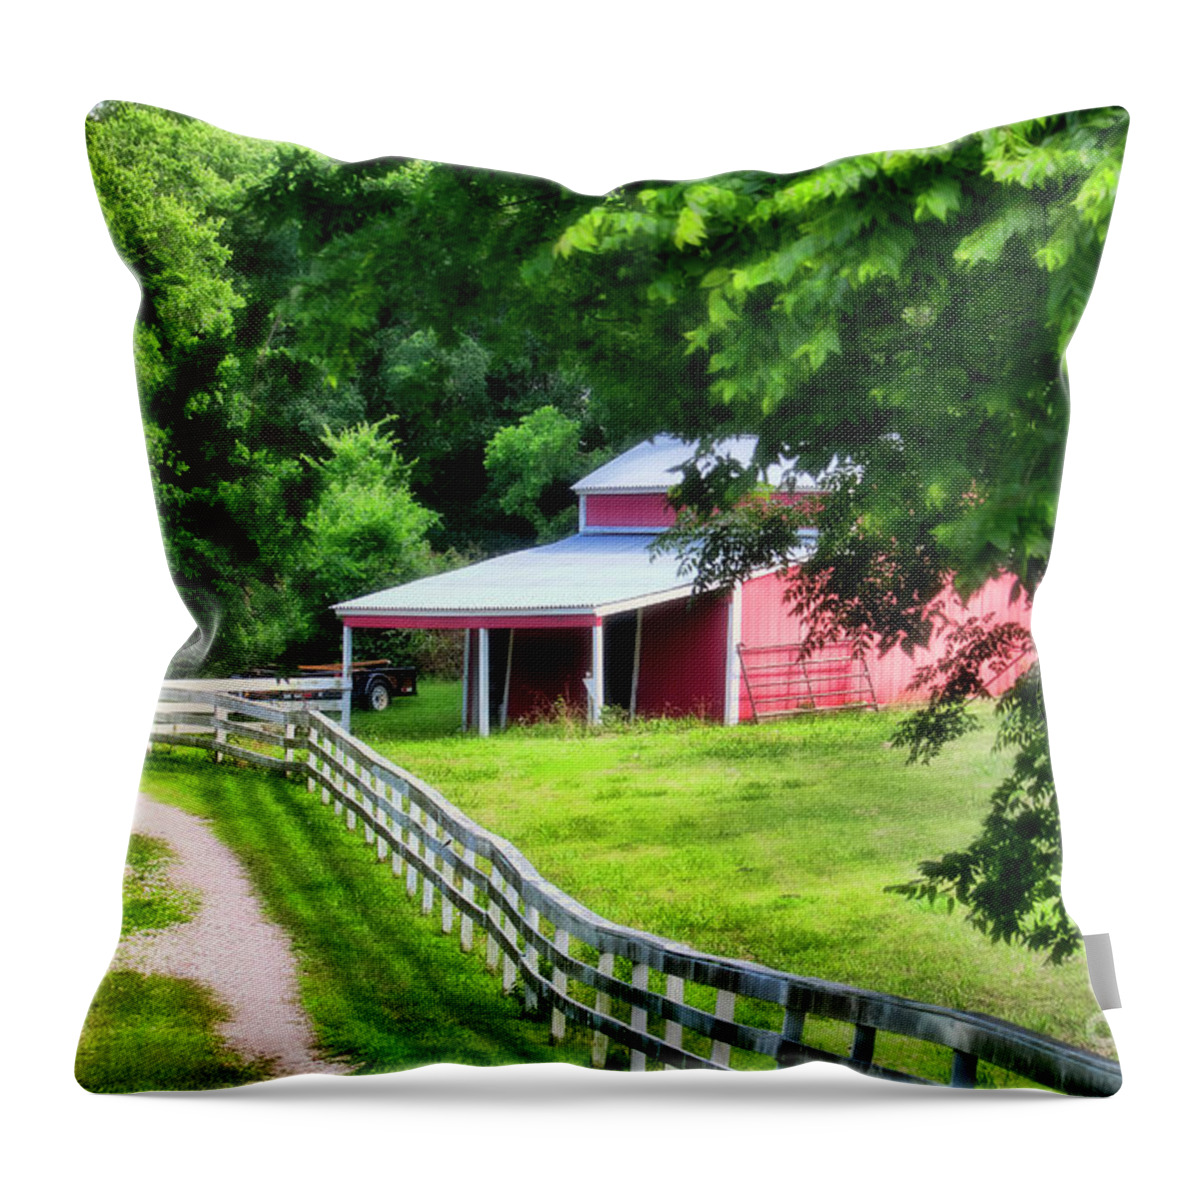 Shed Throw Pillow featuring the photograph A Little Bit Country by Joan Bertucci